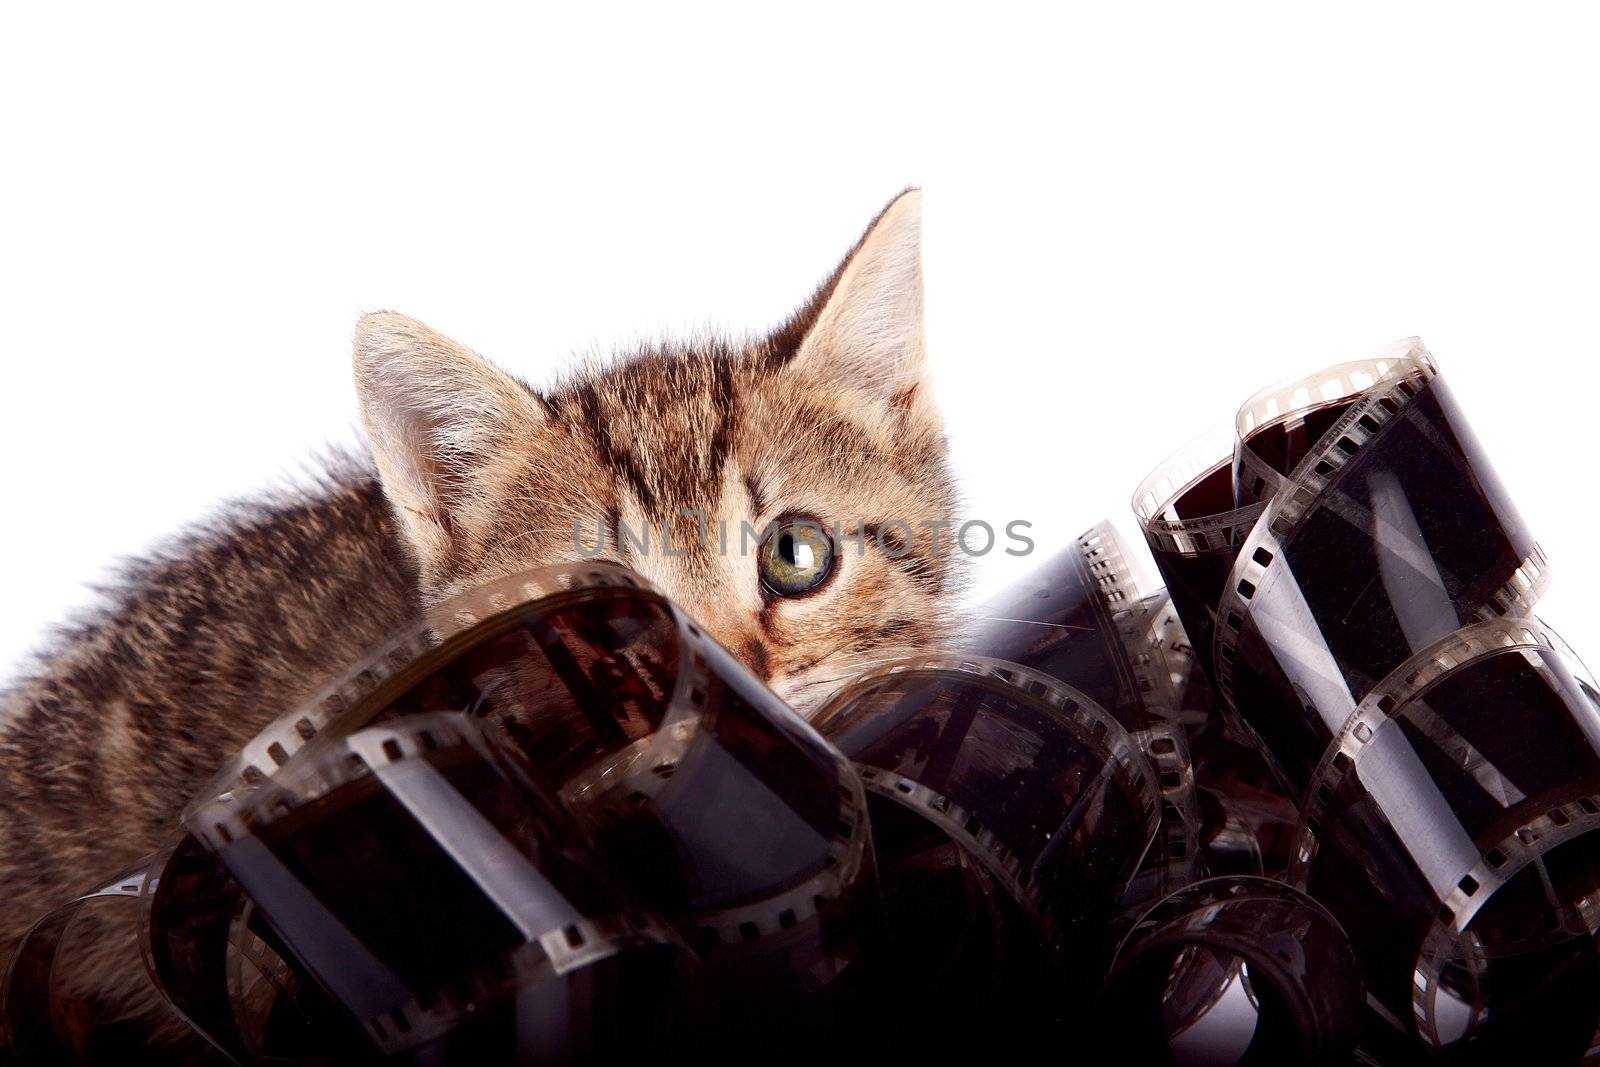 The striped kitten hides behind a film on a white background